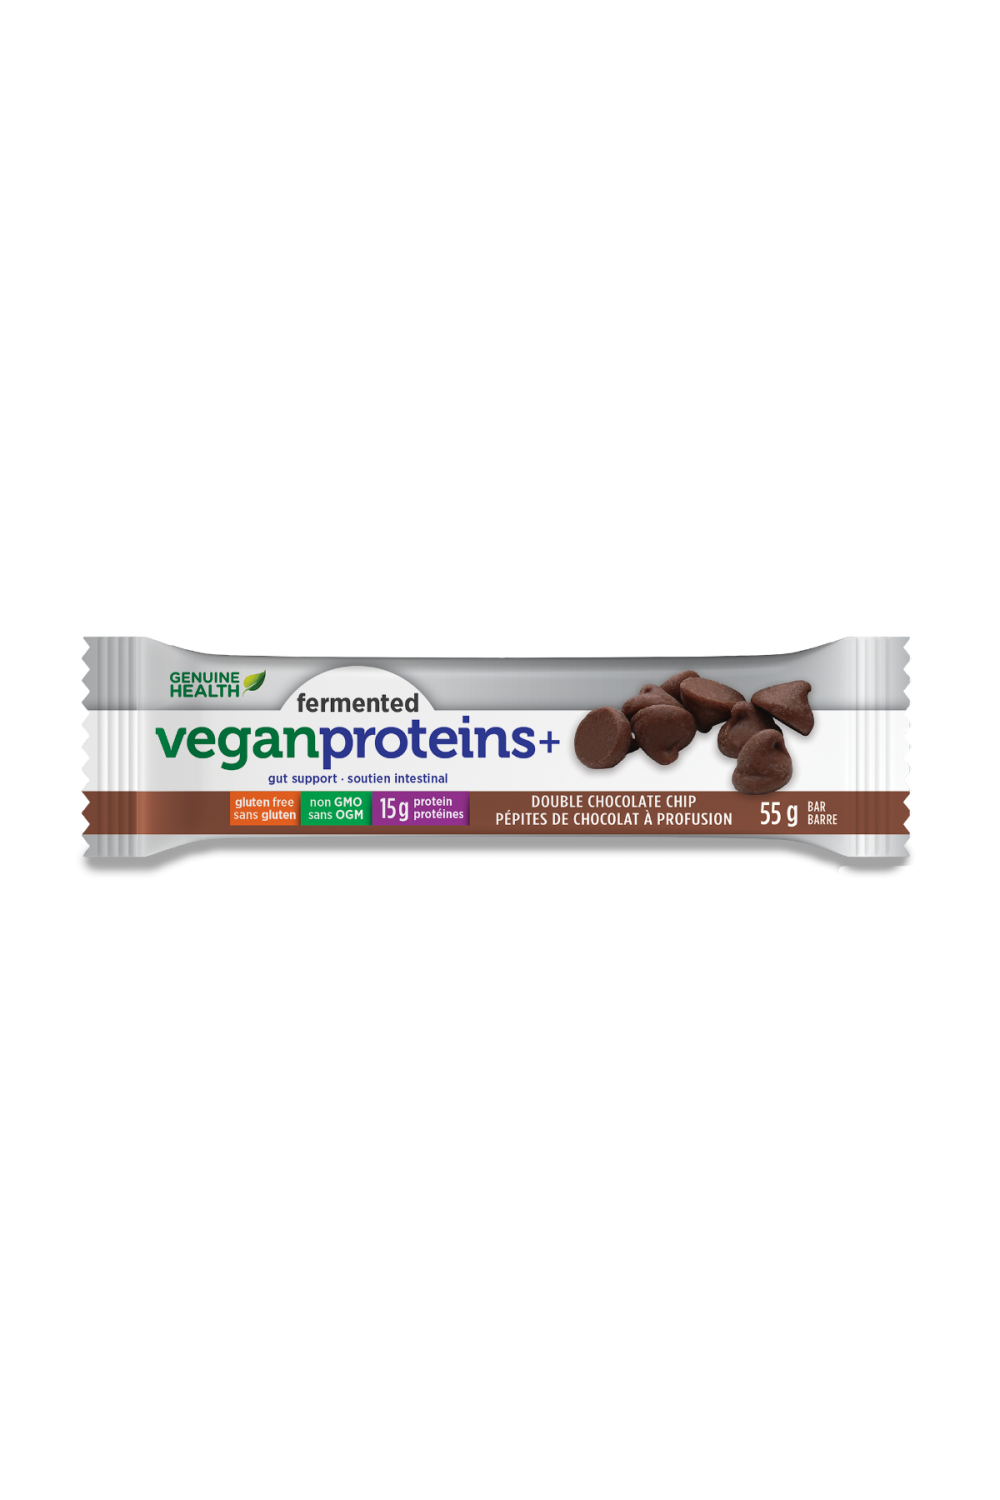 Genuine Health Fermented Vegan Proteins+ Bar - Double Chocolate Chip Flavour 55g